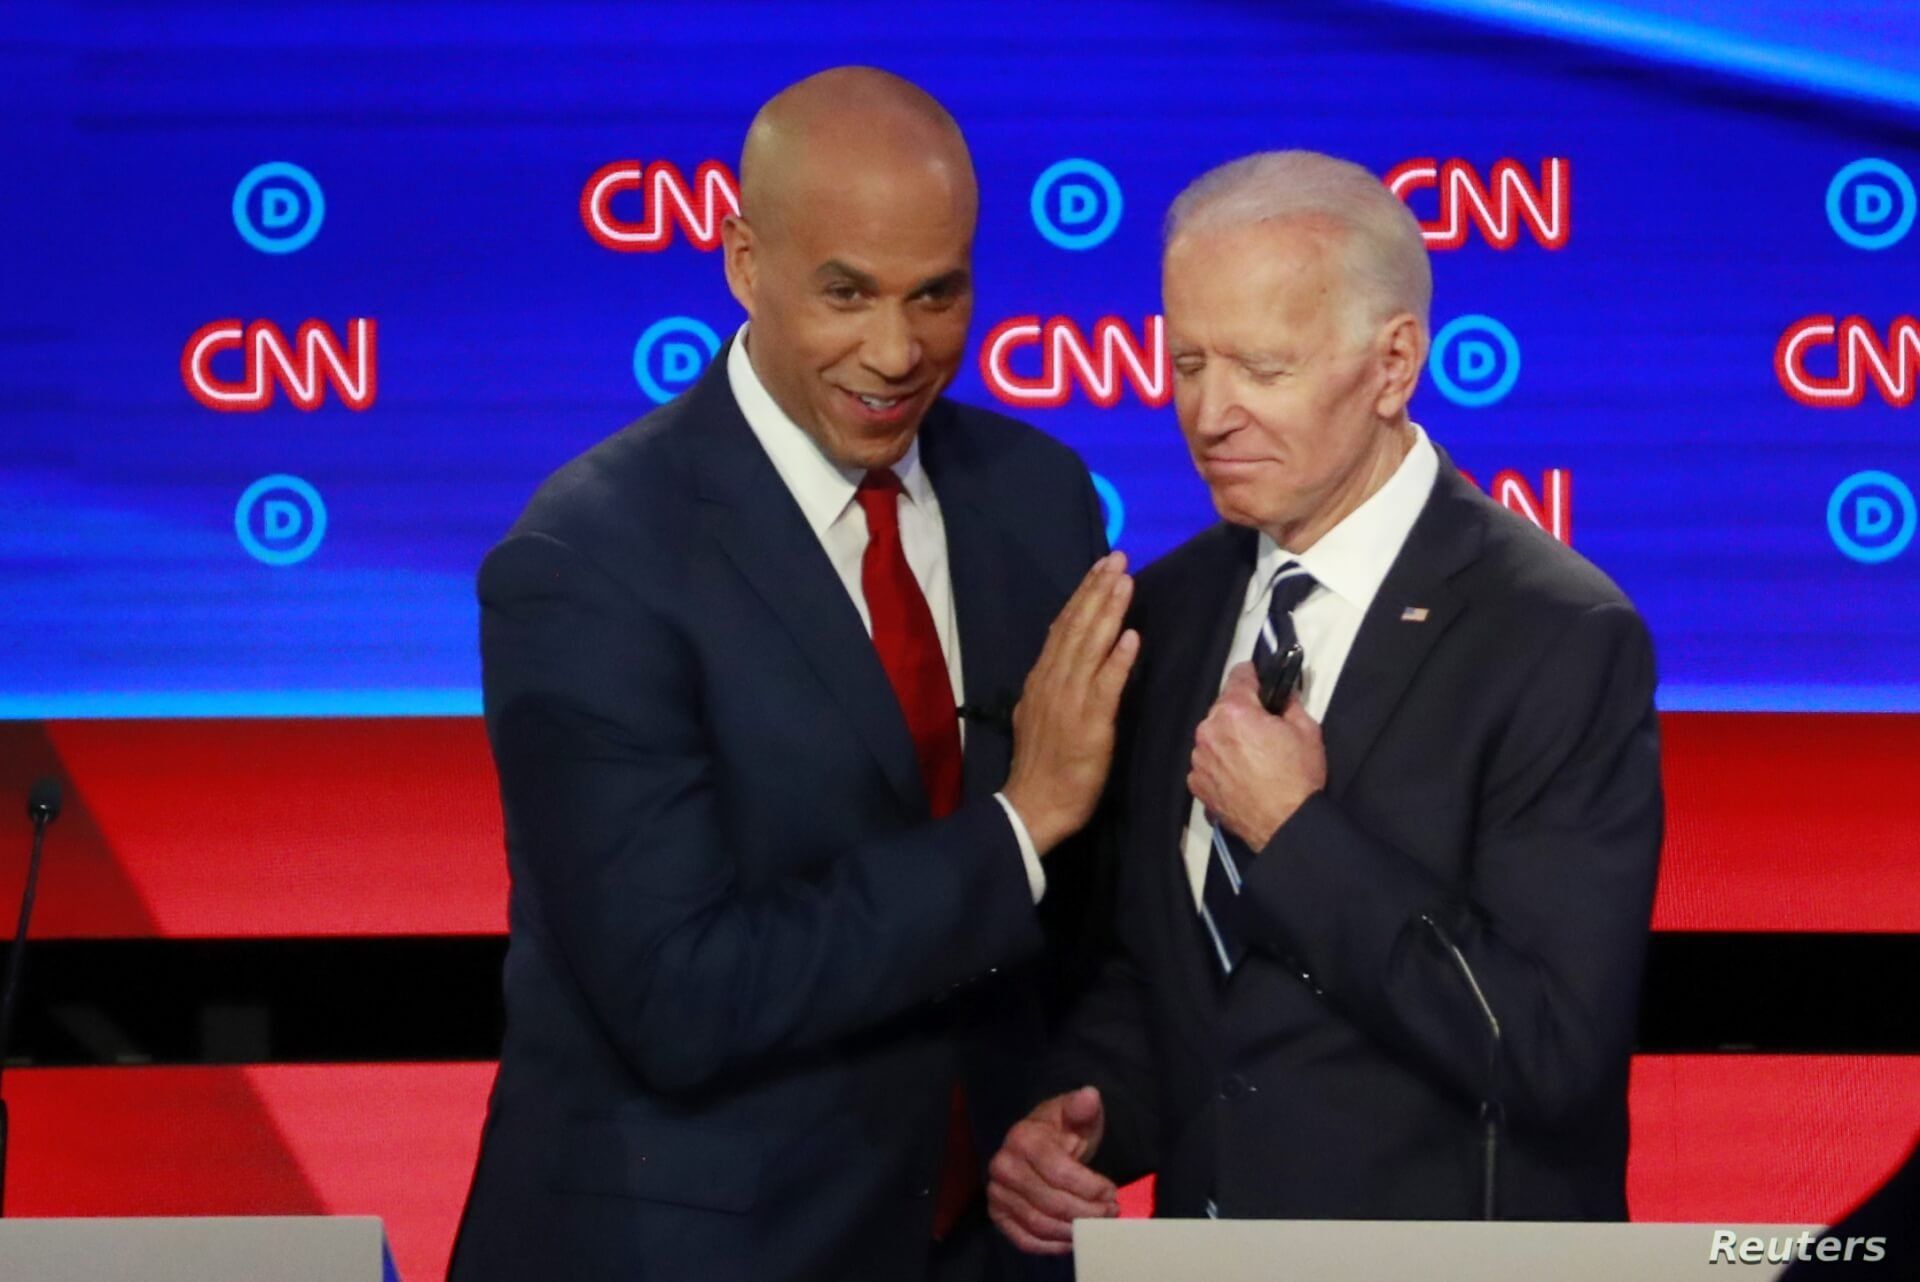 U.S. Senator Cory Booker and former Vice President Joe Biden talk during a commercial break on the second night of the second U.S. 2020 presidential Democratic candidates debate in Detroit, Michigan, U.S.